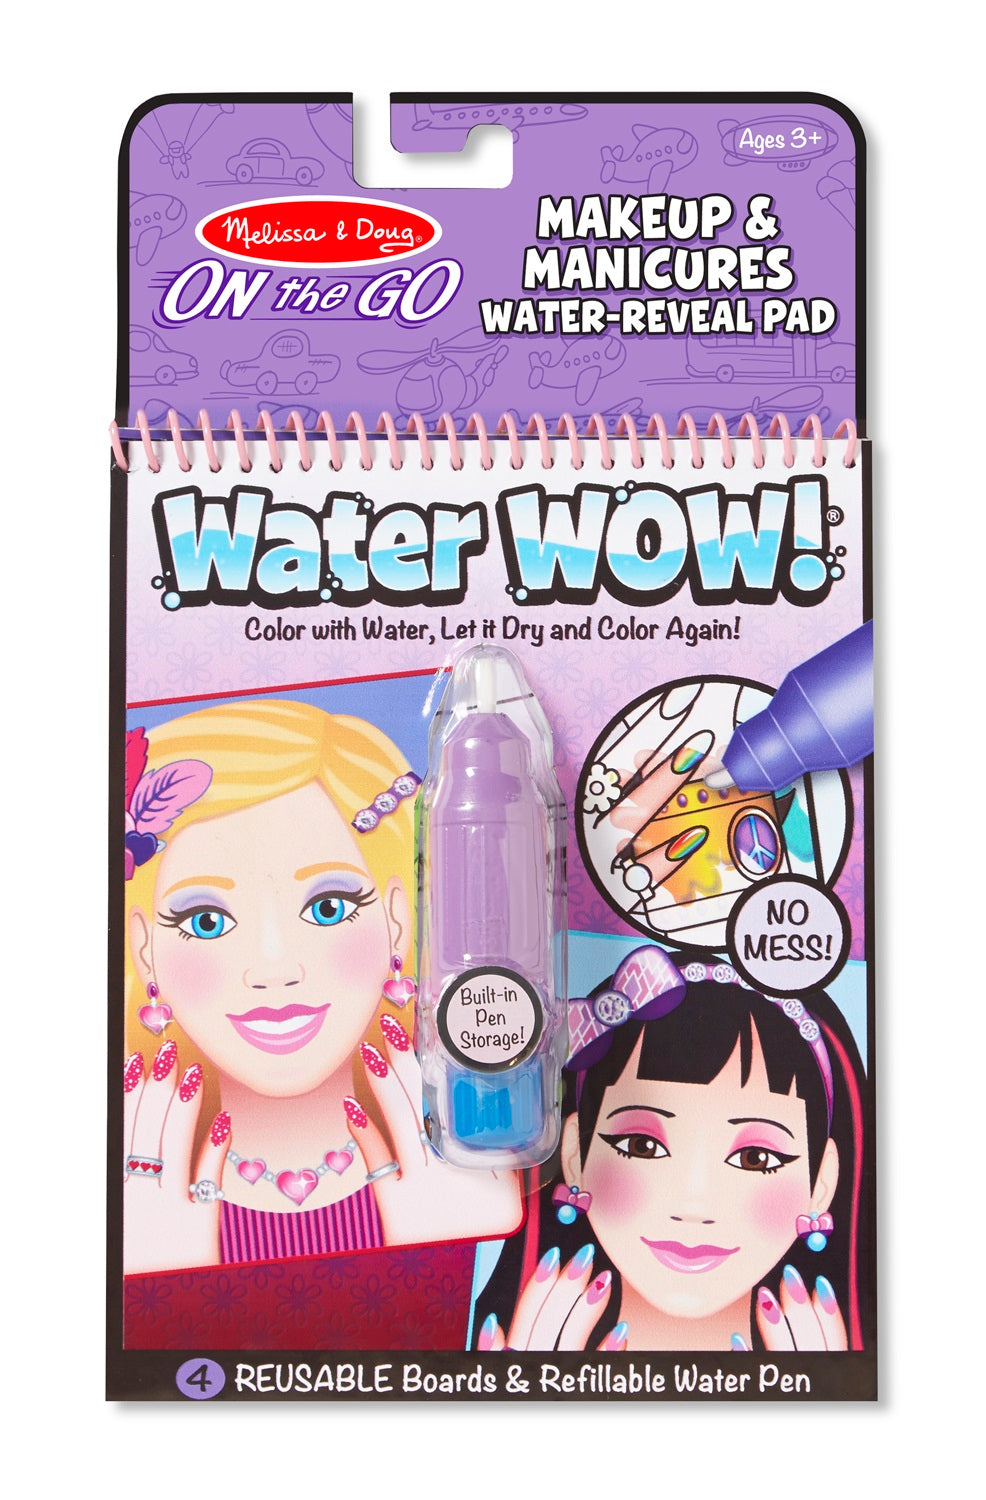 Water Wow:  Make-up & manicures